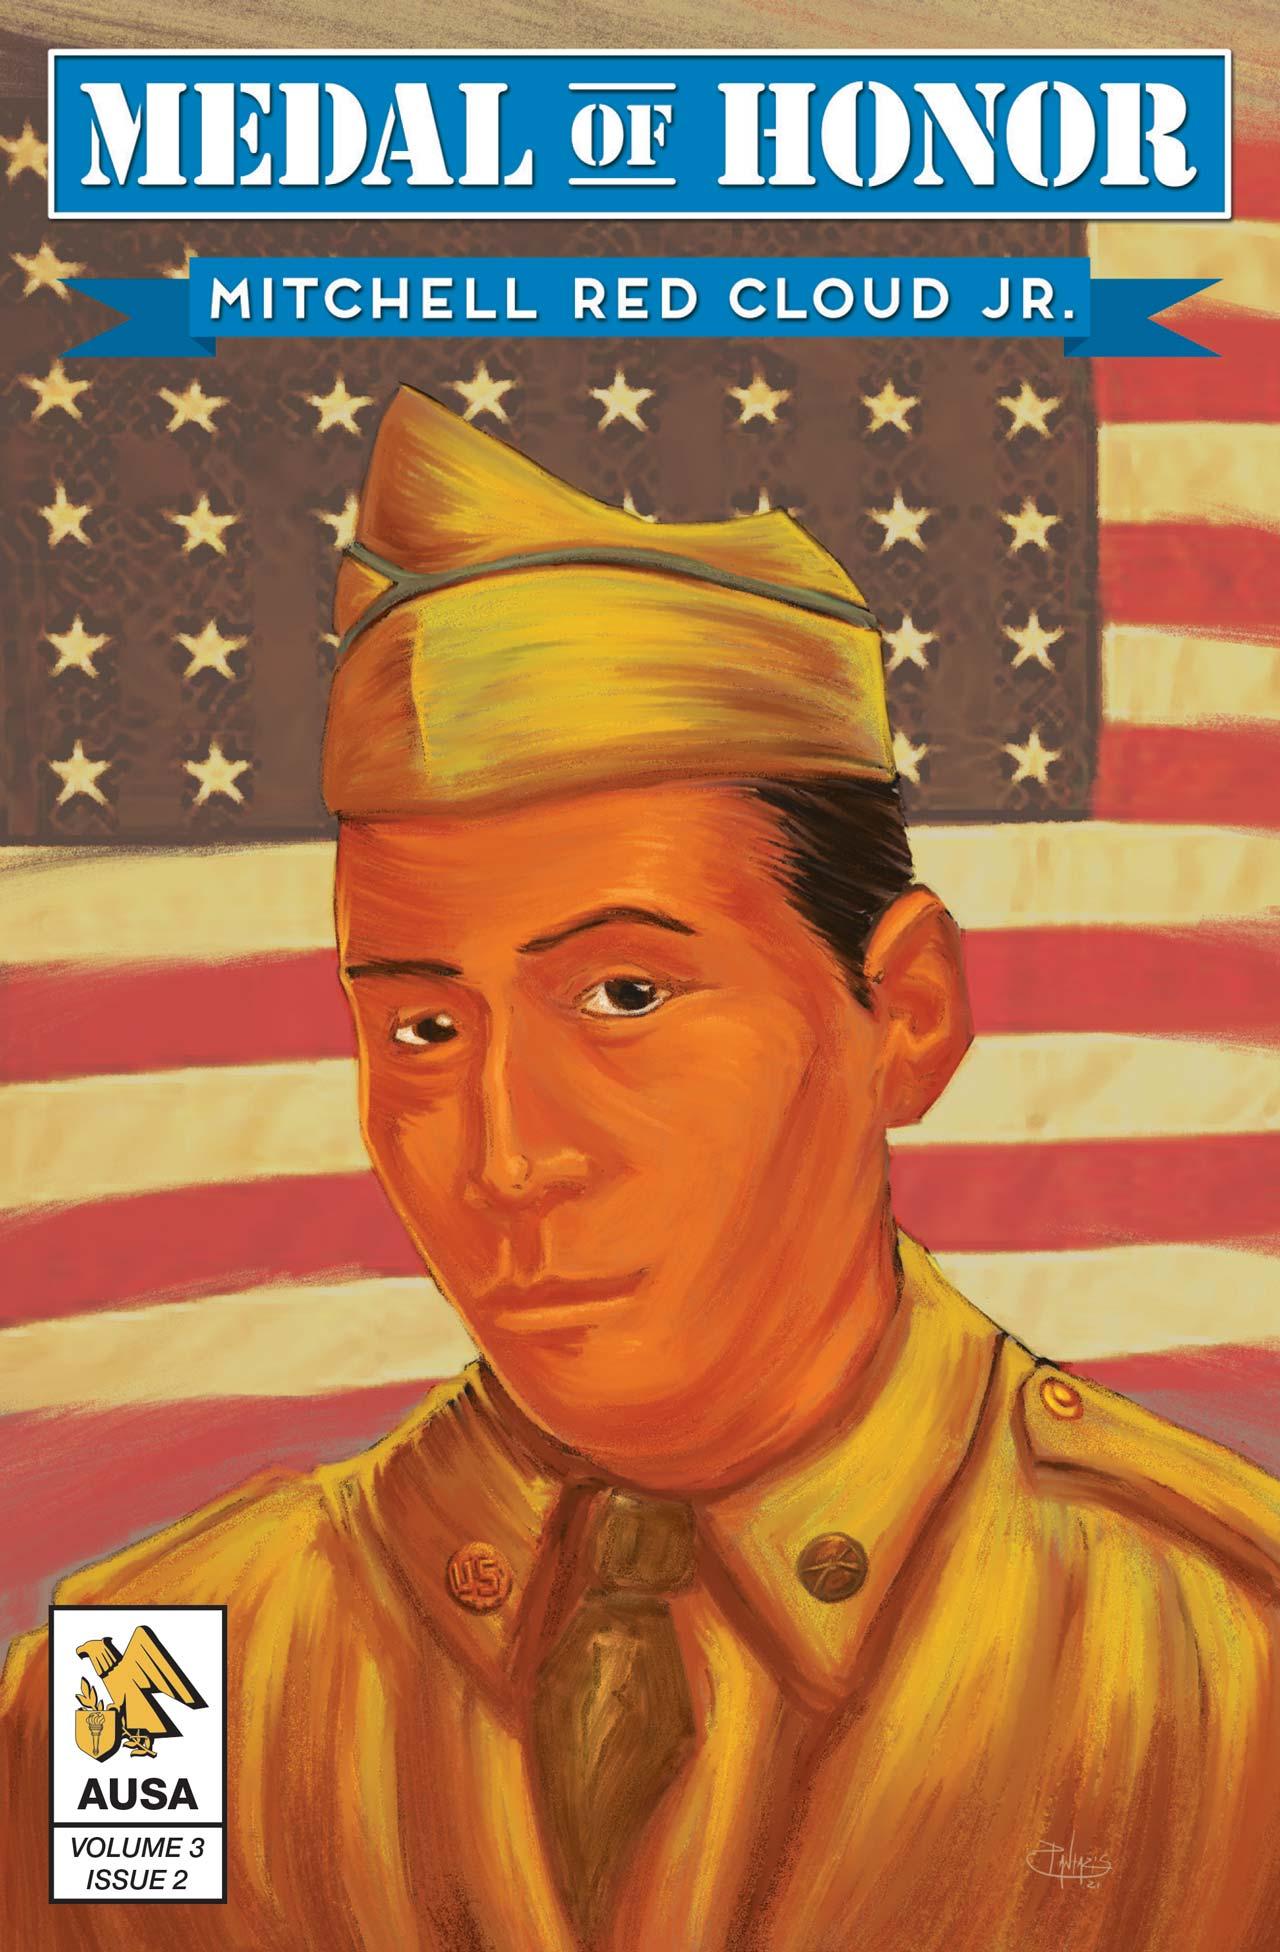 The cover of a graphic novel about Mitchell Red Cloud, Jr.